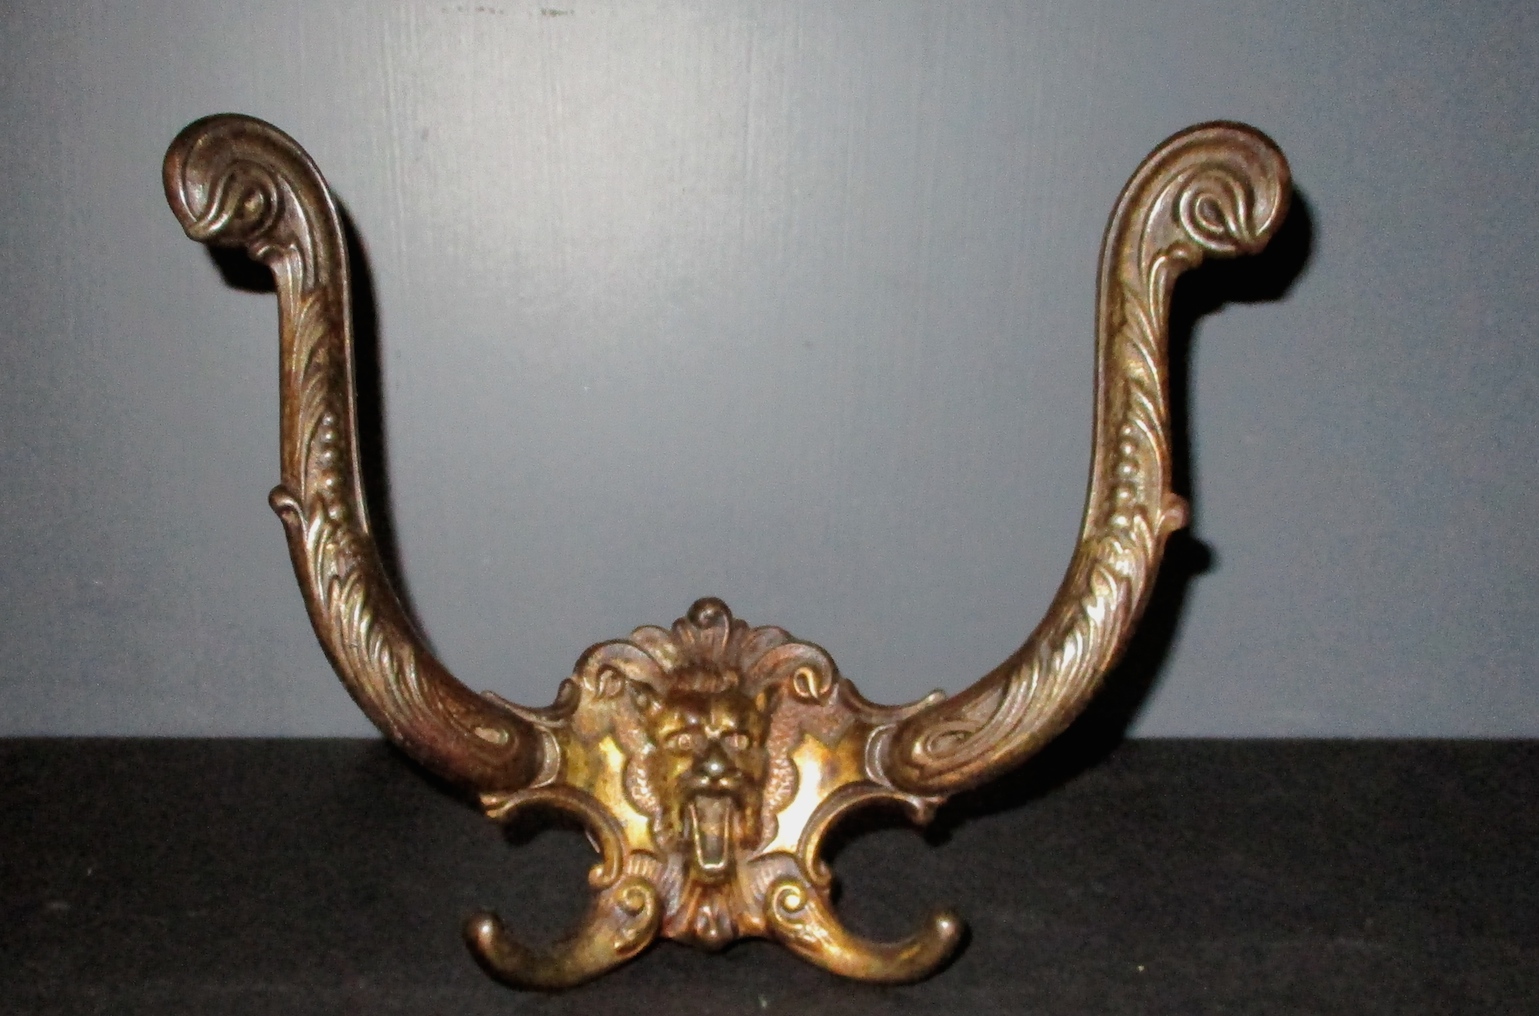 19th Century Brass Plated Iron Coat Hook w/Grotesque Face - 6 1/2" W x 5" H x 3" D)